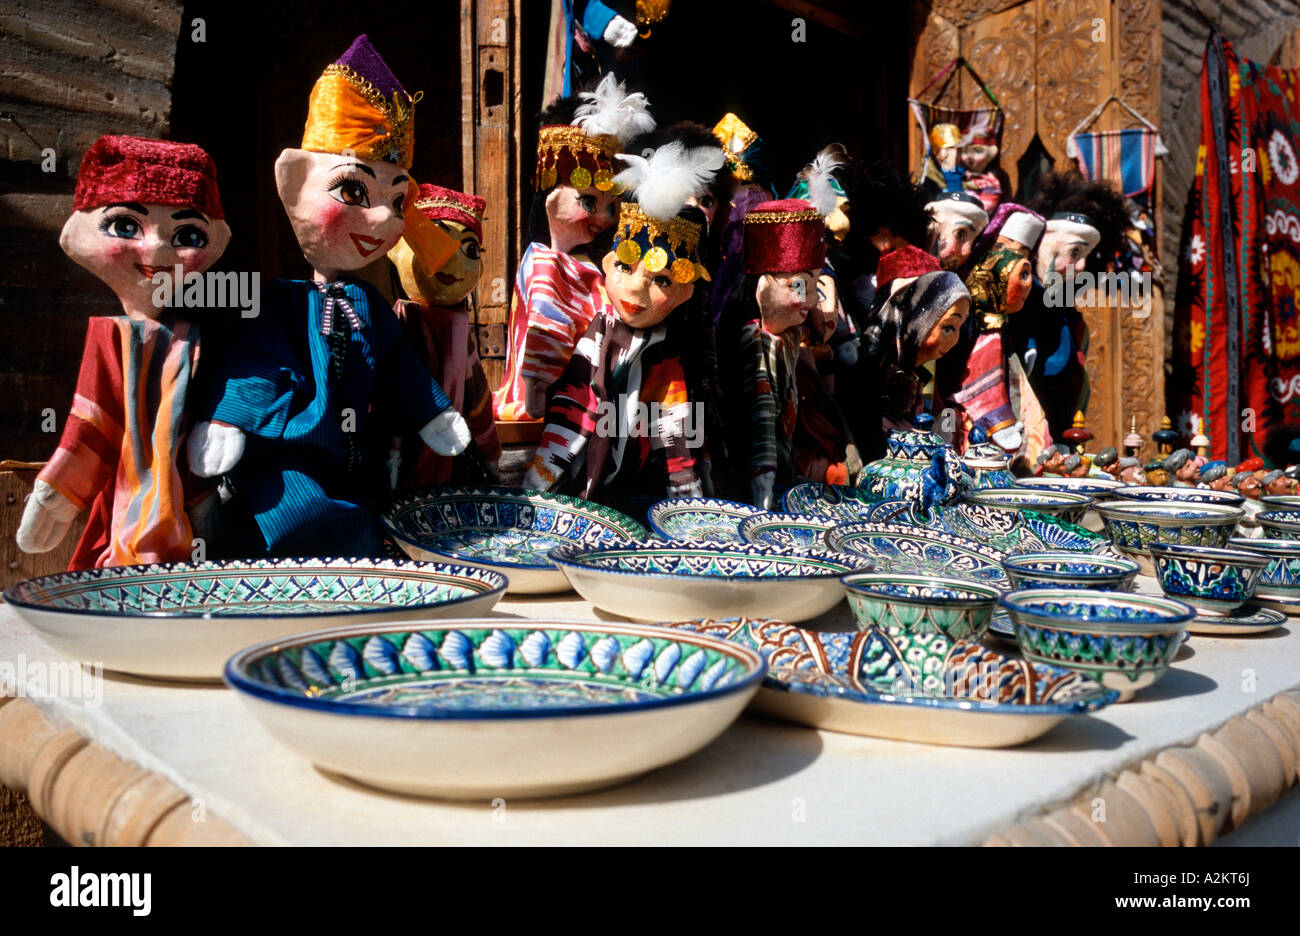 May 17, 2006 - Hand puppets and ceramcis, the traditional souvenirs, are on sale outside a mosque in the Uzbek town of Khiva. Stock Photo